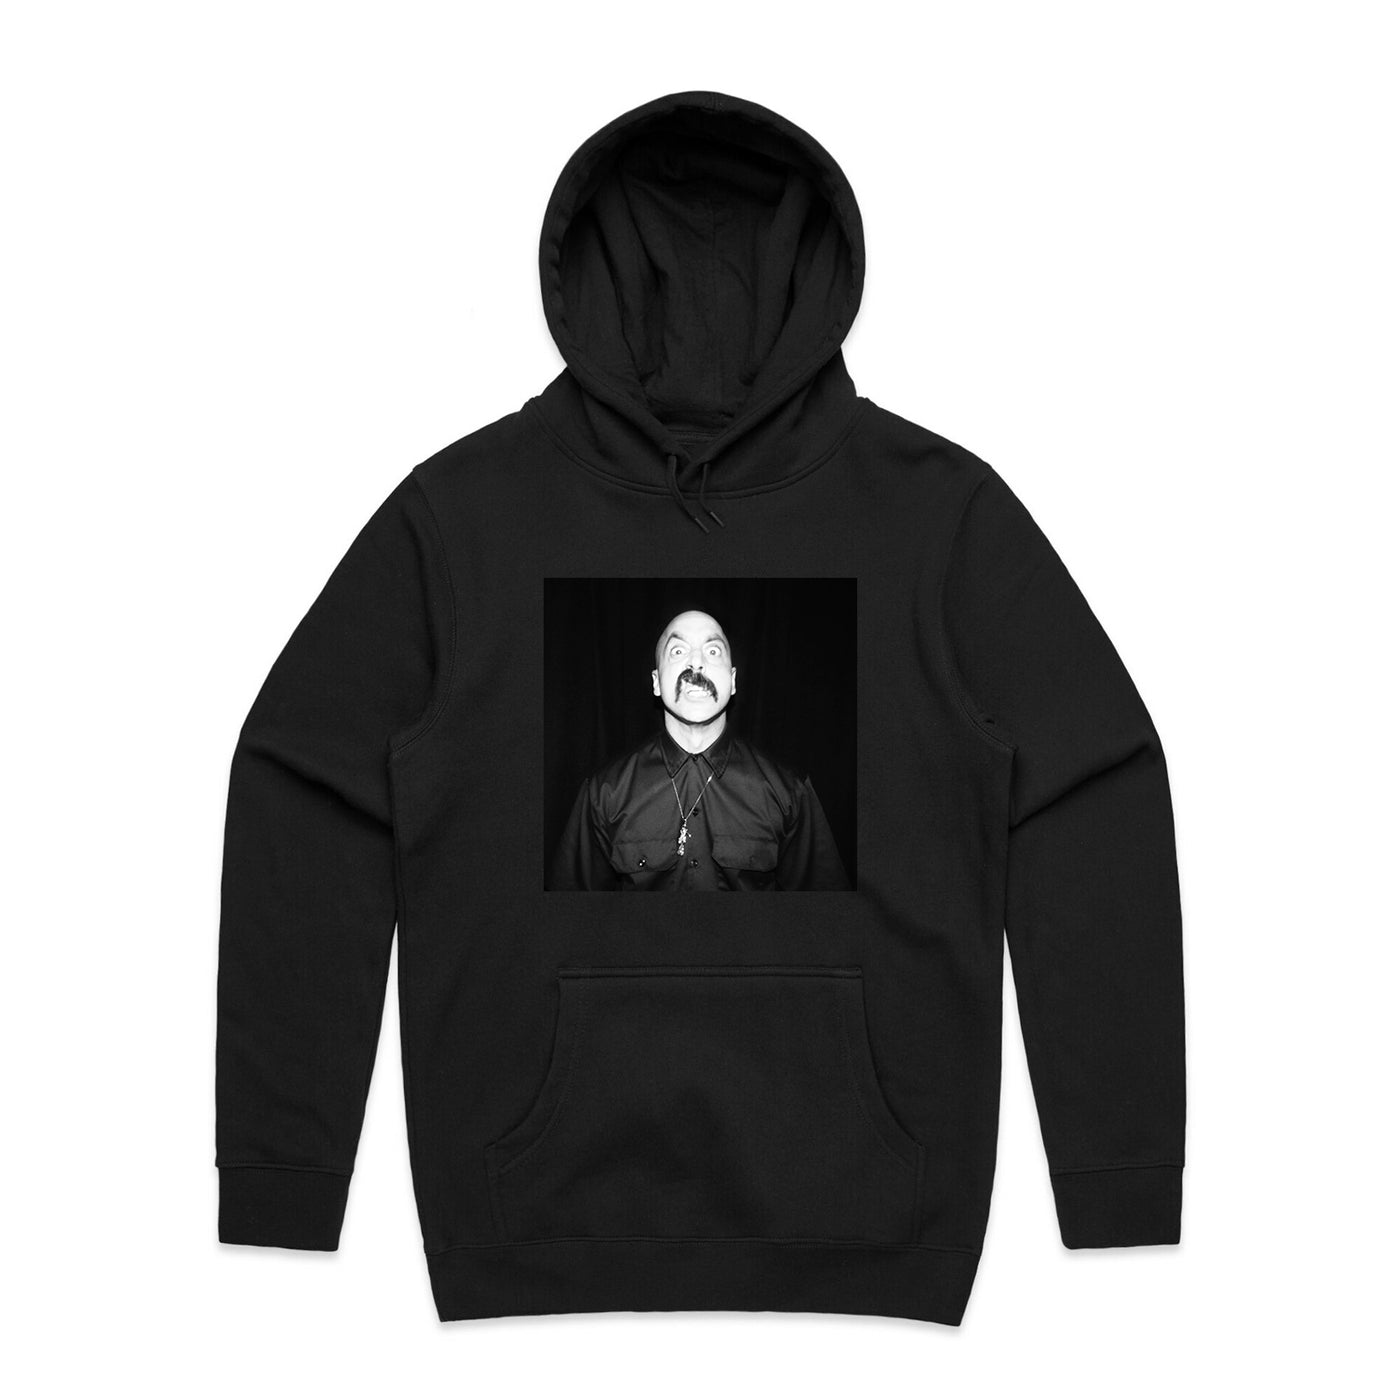 N8NOFACE - Bound to Let You Down (The Remixes) Black Hoodie